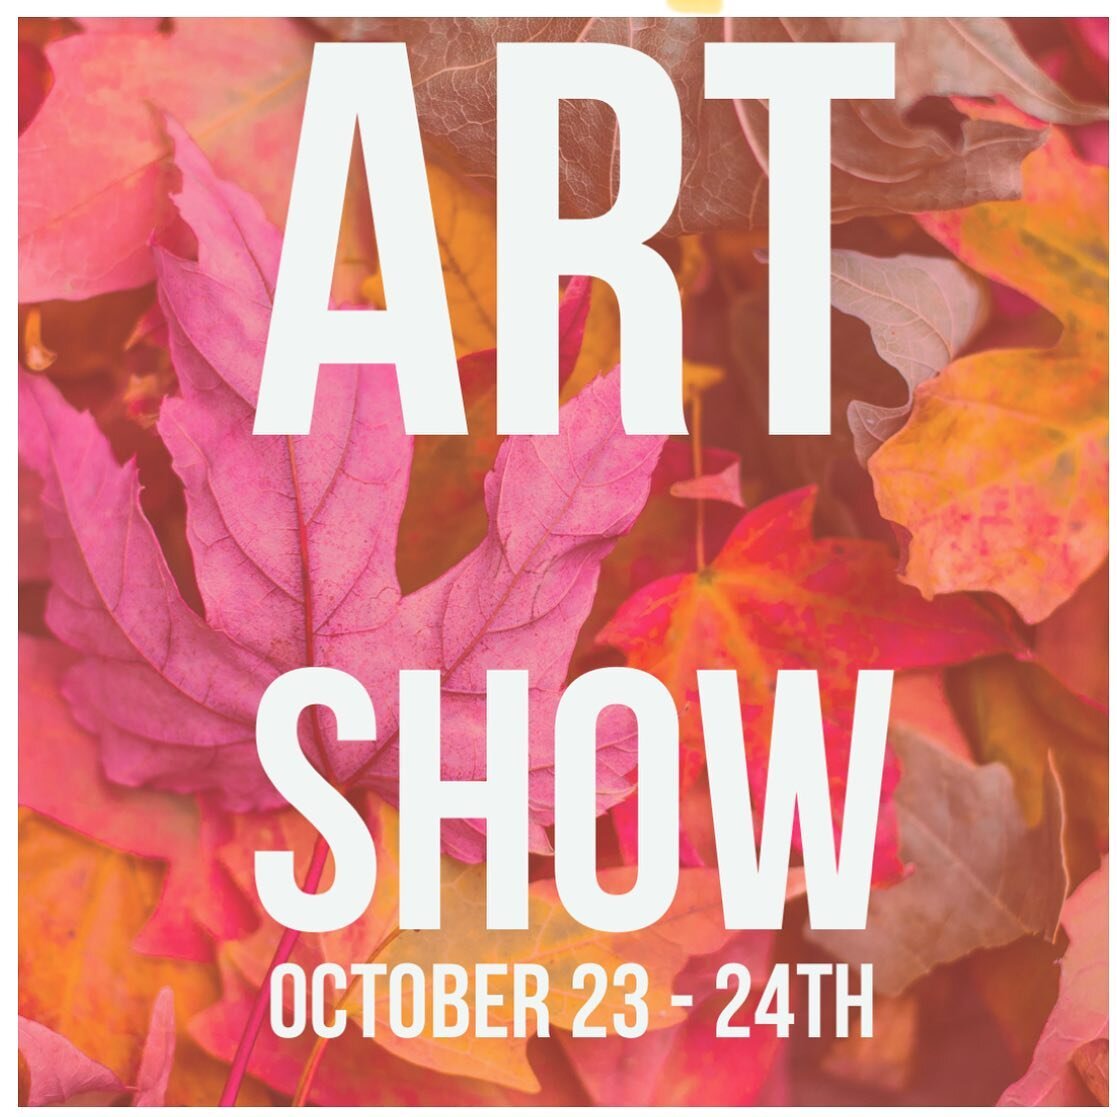 Last call for entries to the art show! Deadline for online commitment is Oct 1st. Up to 5 pieces can be entered for consideration! All styles. Find out more at www.thegrounds1488.com/art-show-1 #thegrounds1488
#fallfestivaloct24
#thingstodohouston 
#